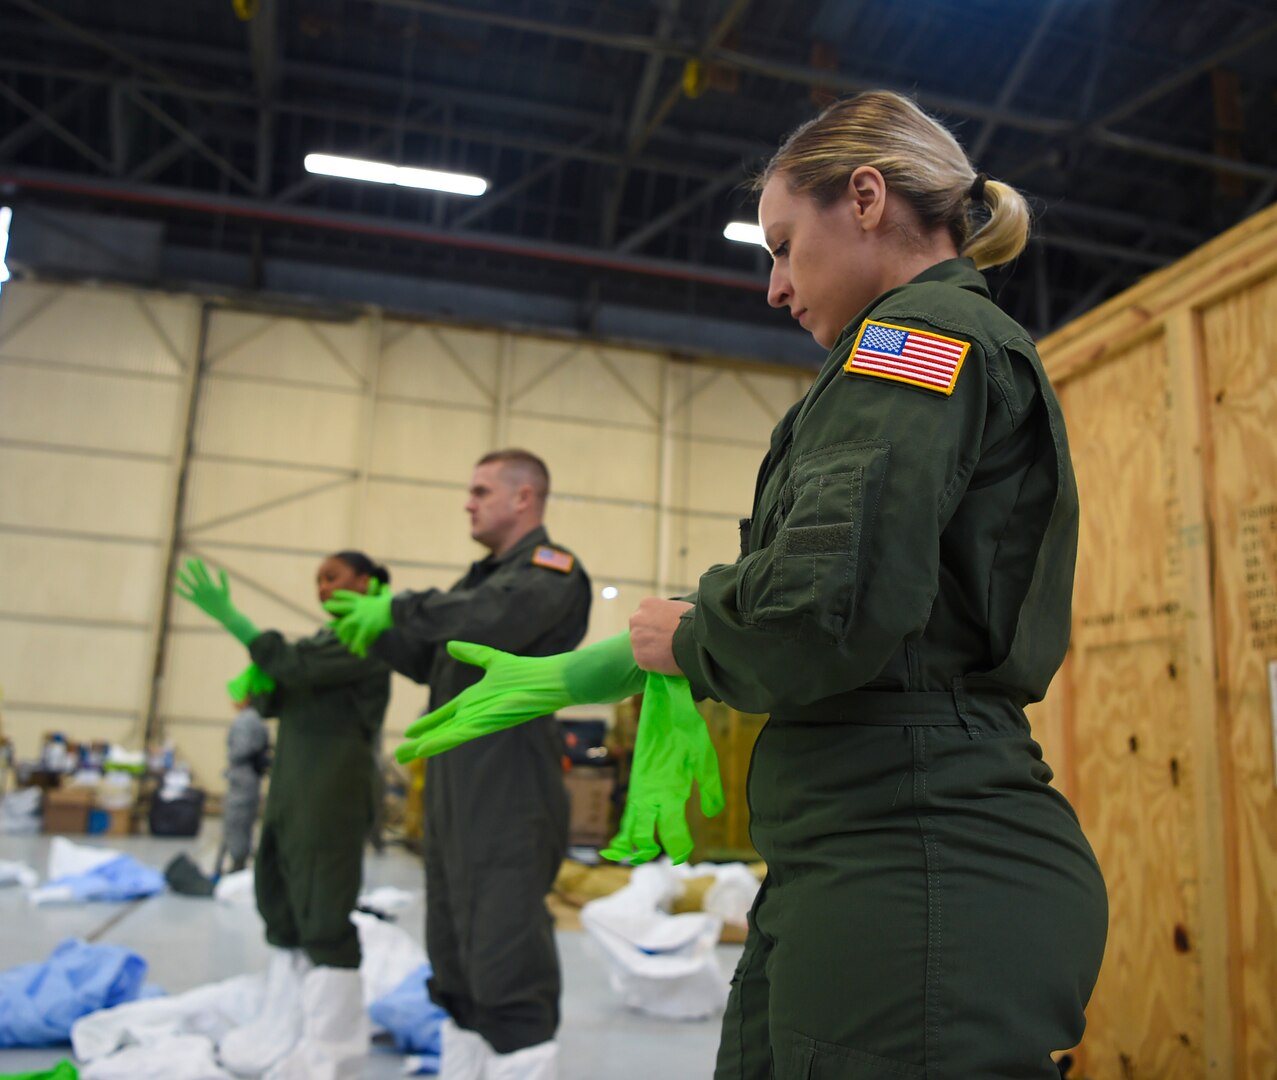 Image of Staff Sgt. Laura Mendoza as she dons her personal protection equipment during transportation isolation system training at Joint Base Charleston, South Carolina, March 5, 2019.